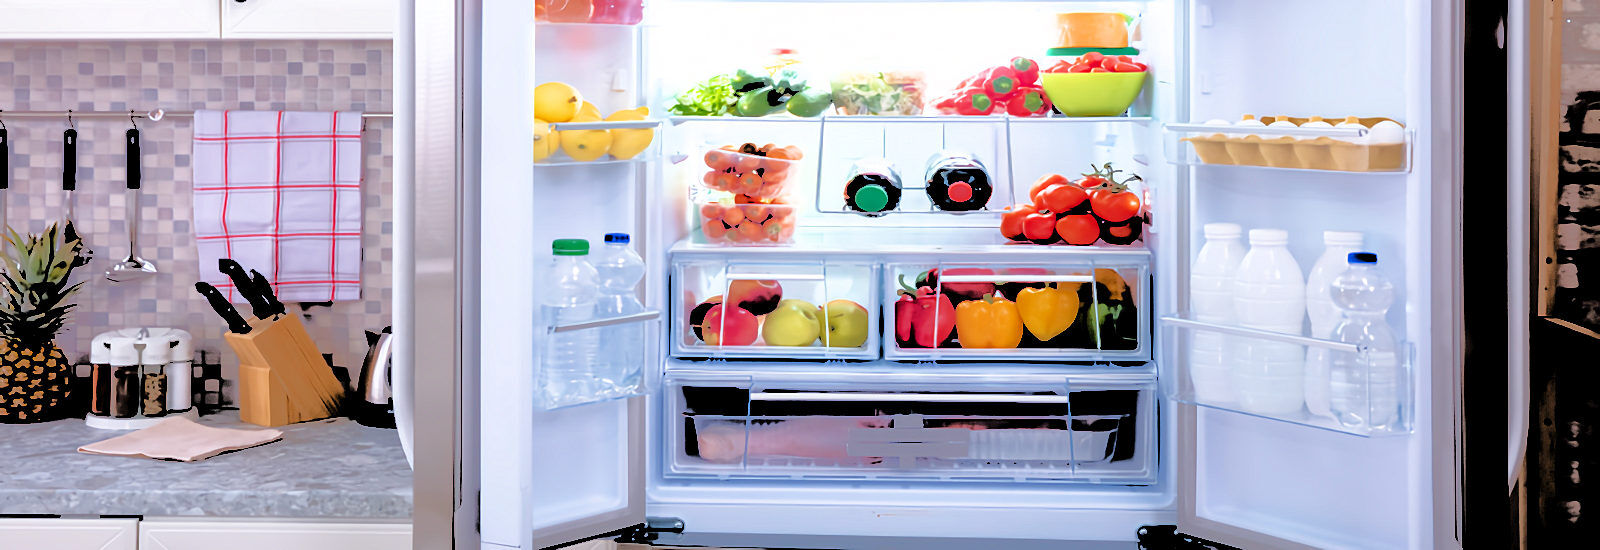 Refrigerator Repair Service in Melbourne and Brevard County Florida